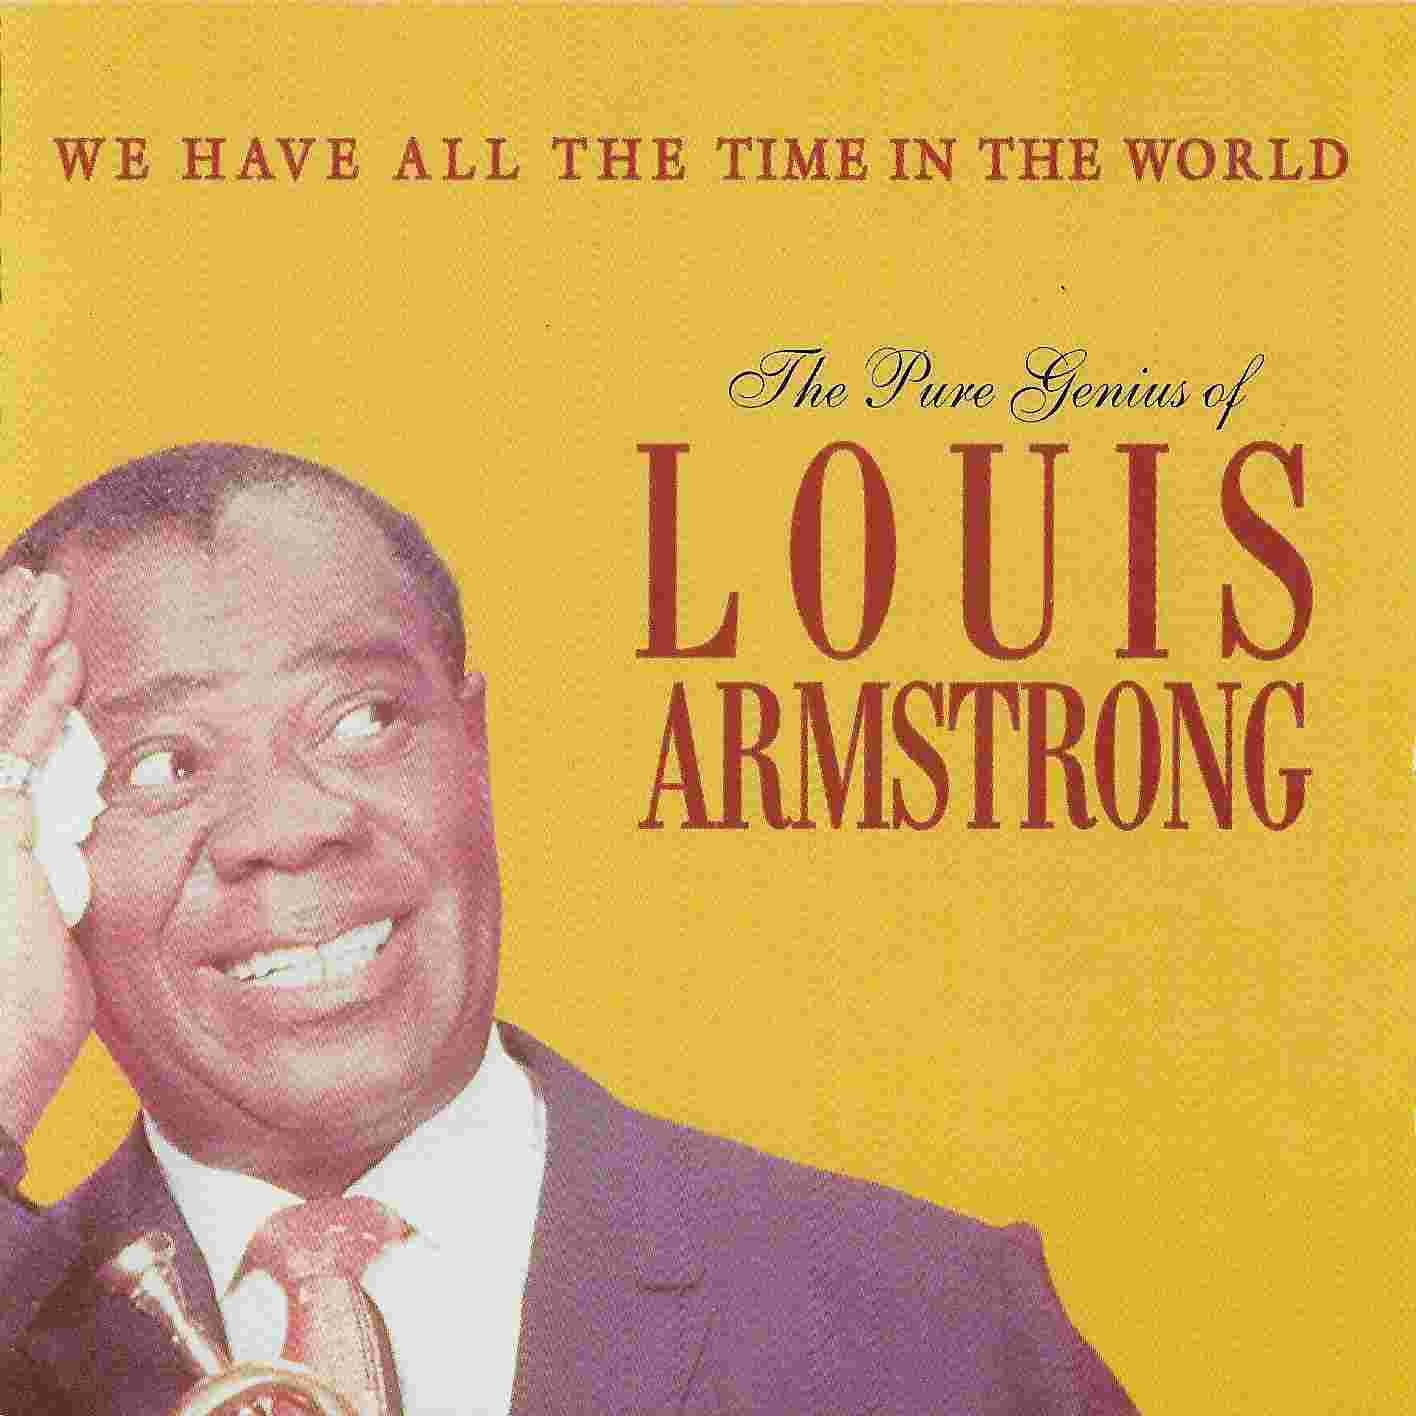 Picture of The pure genius of Louis Armstrong by artist Louis Armstrong 